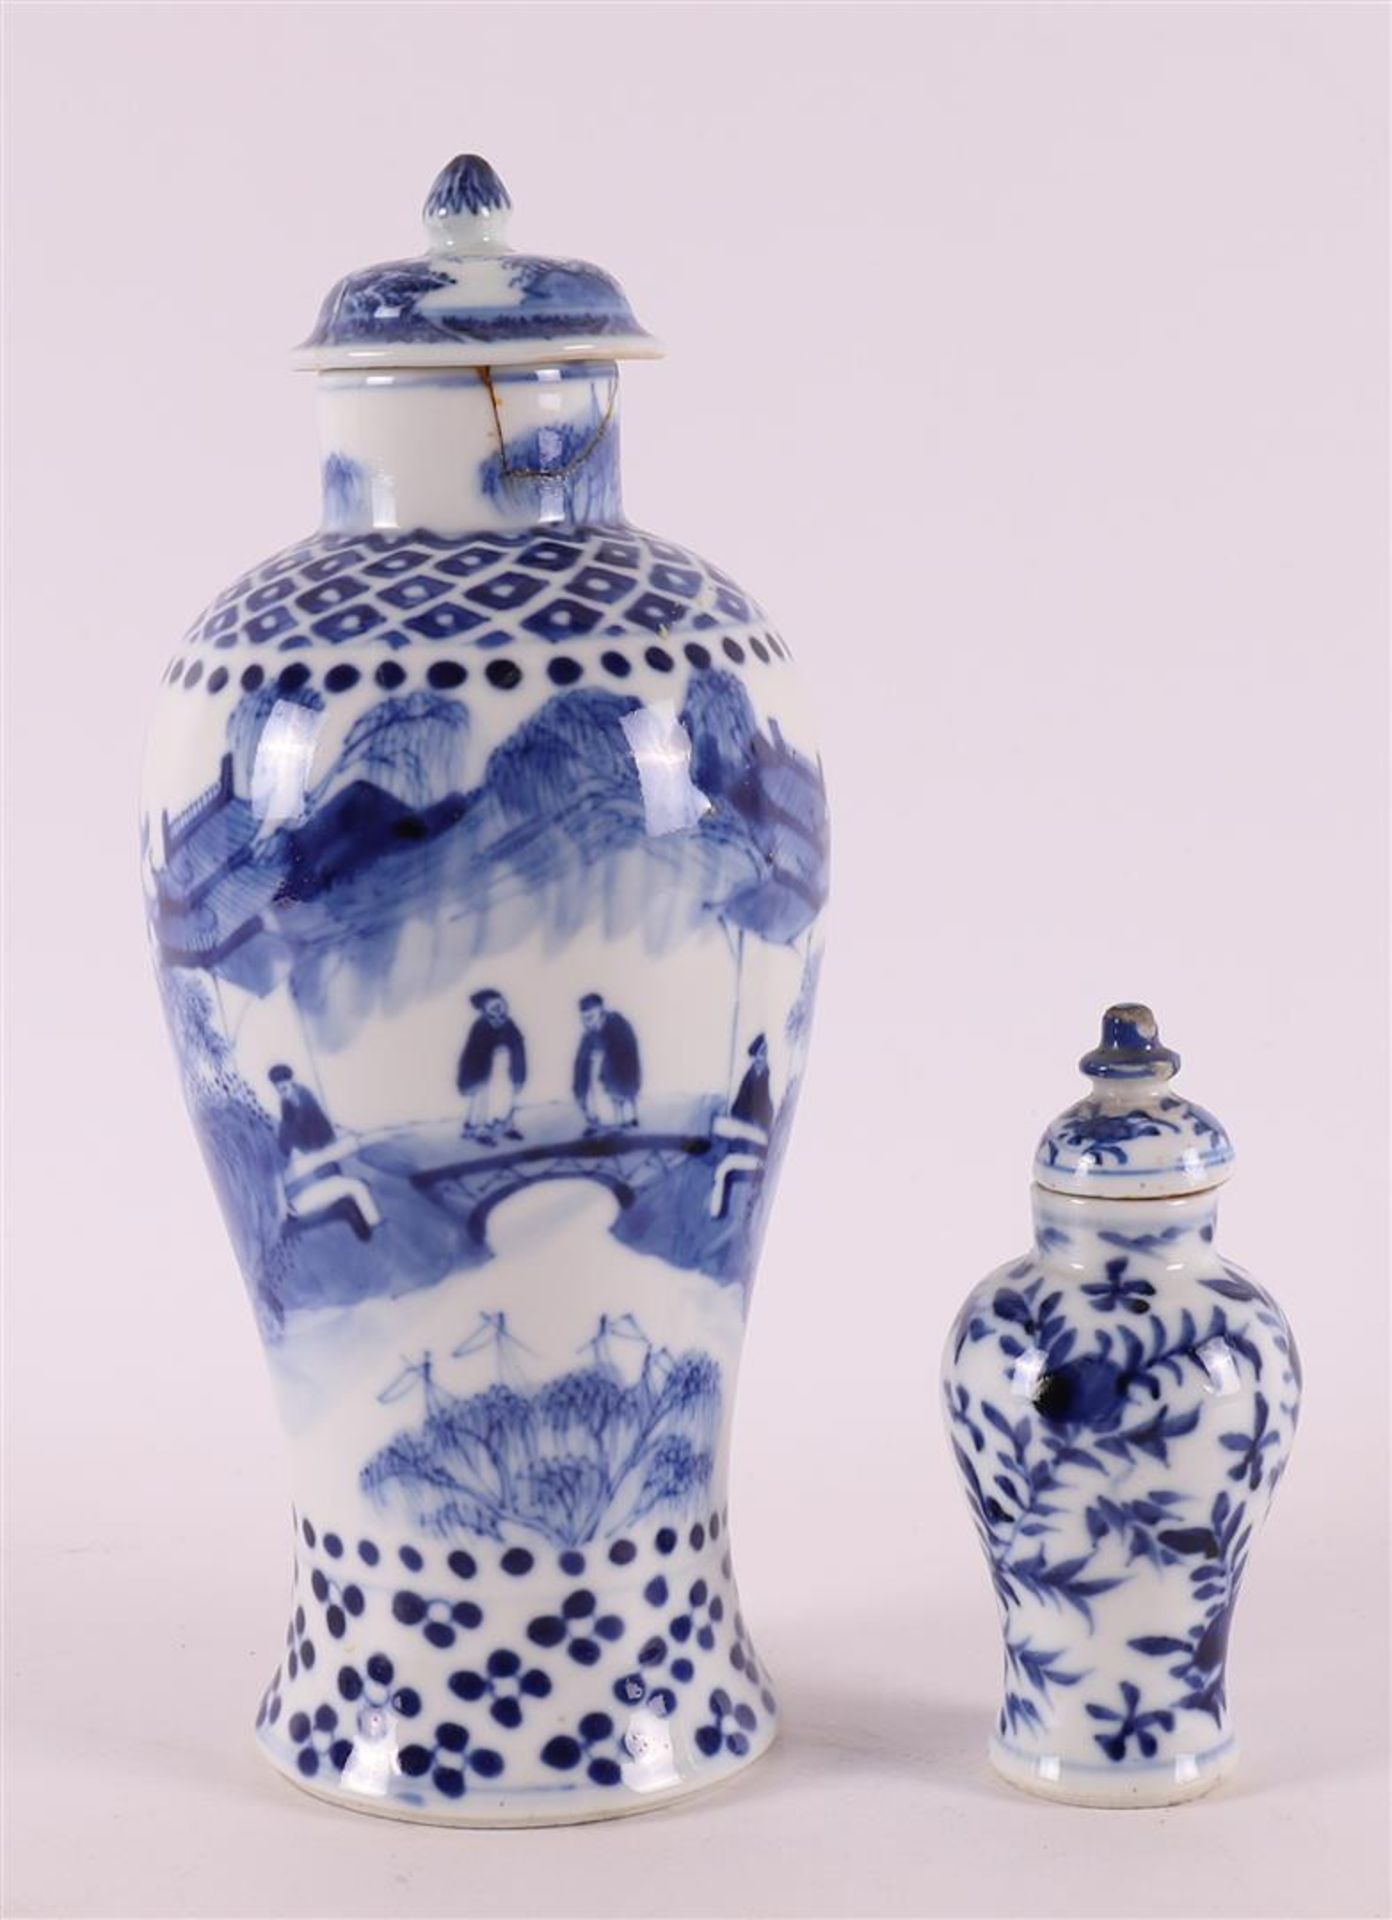 A blue and white porcelain baluster vase, China, 19th century.